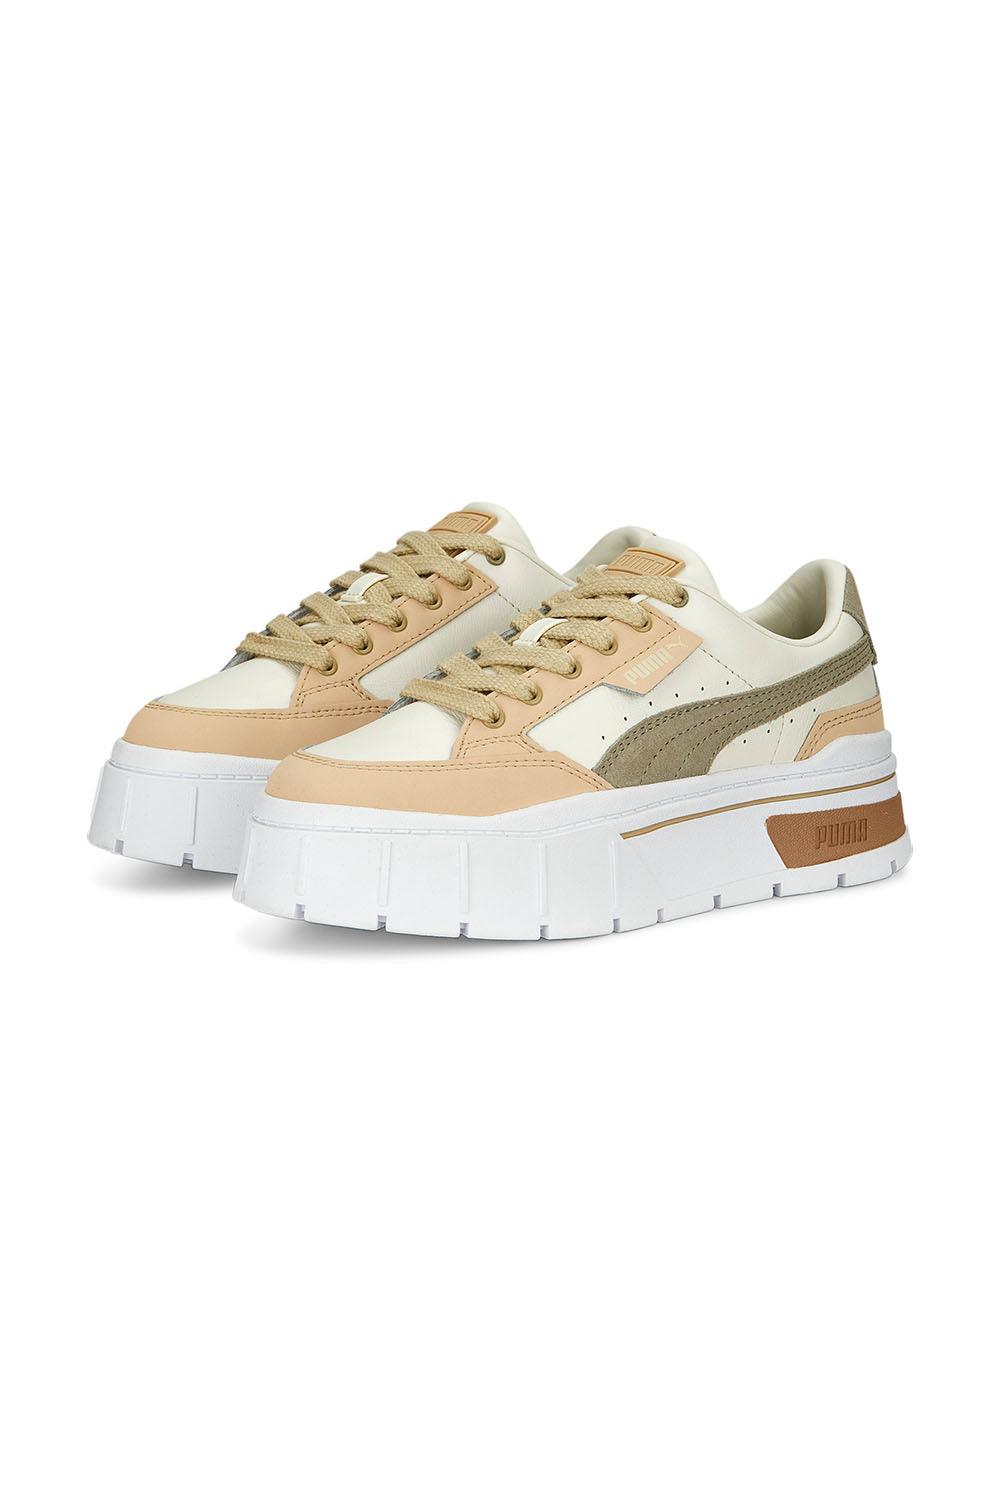 Puma | Mayze Stack Luxe Wns Whisper White Pale 1 | Milagron